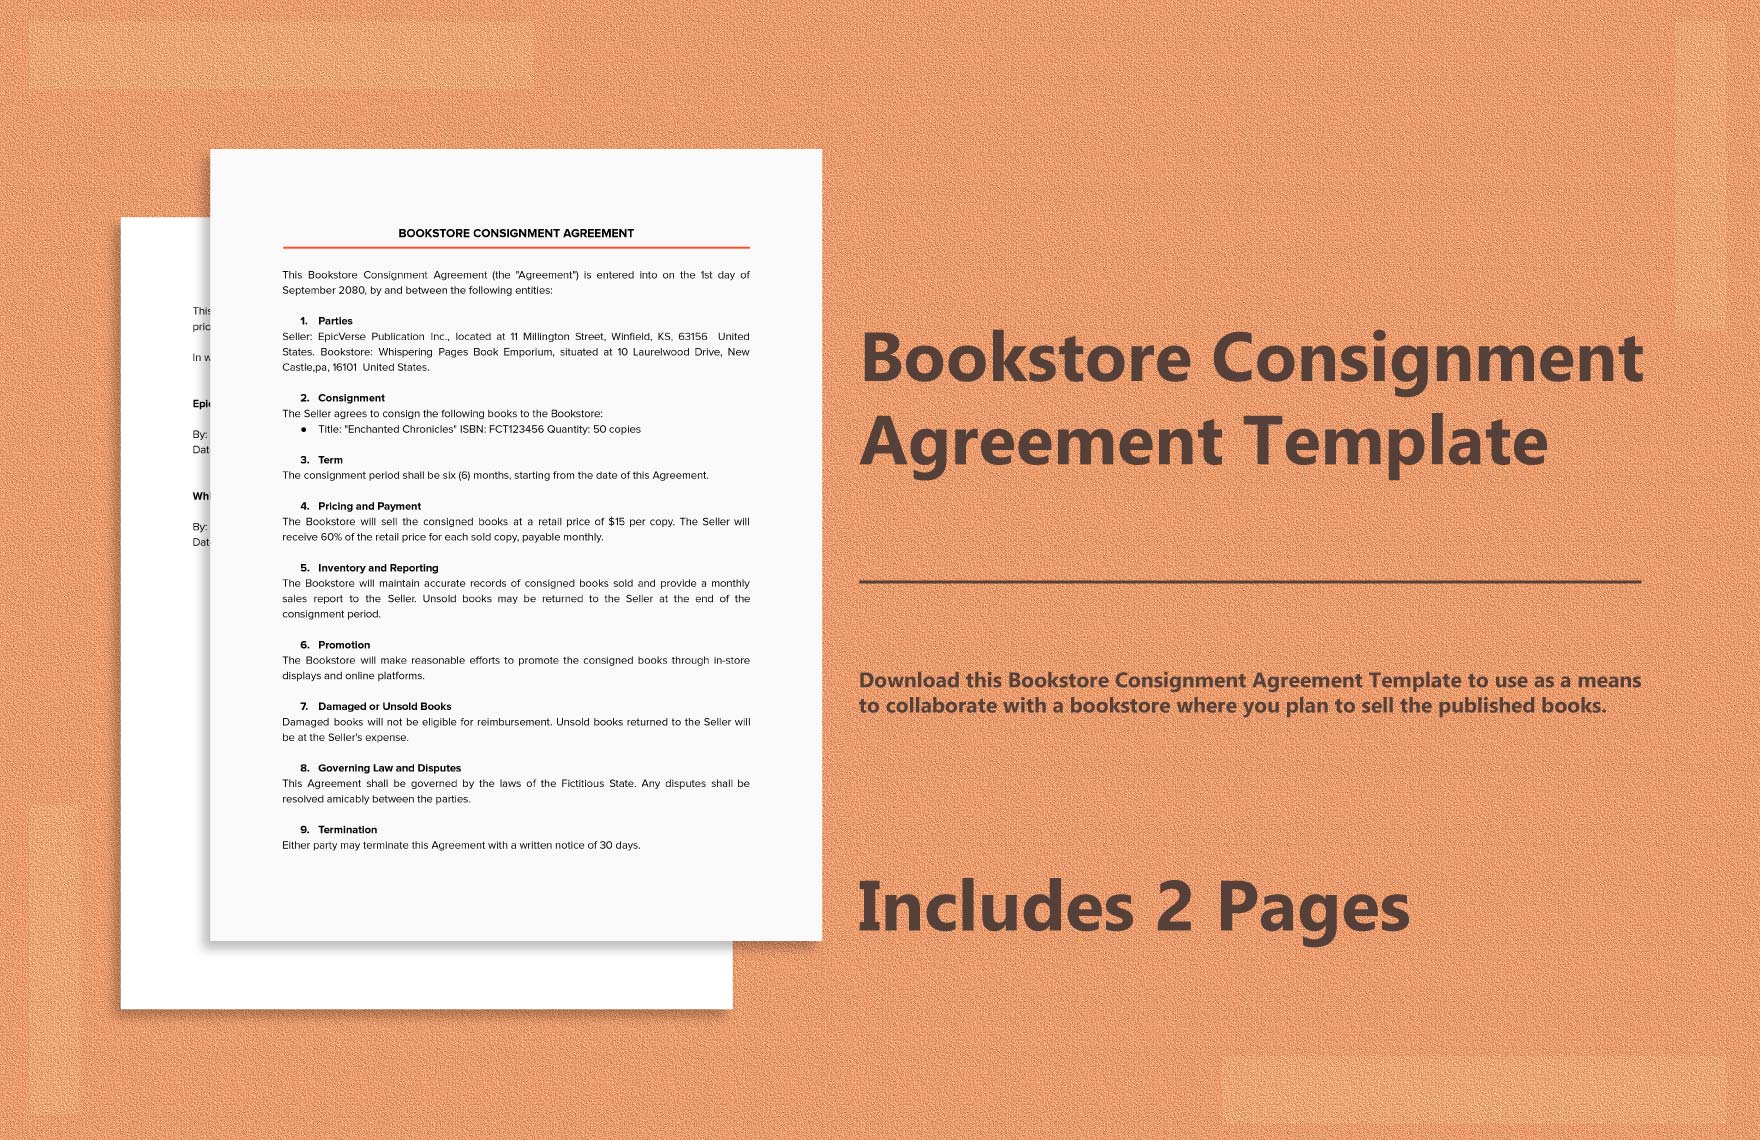 Bookstore Consignment Agreement Template